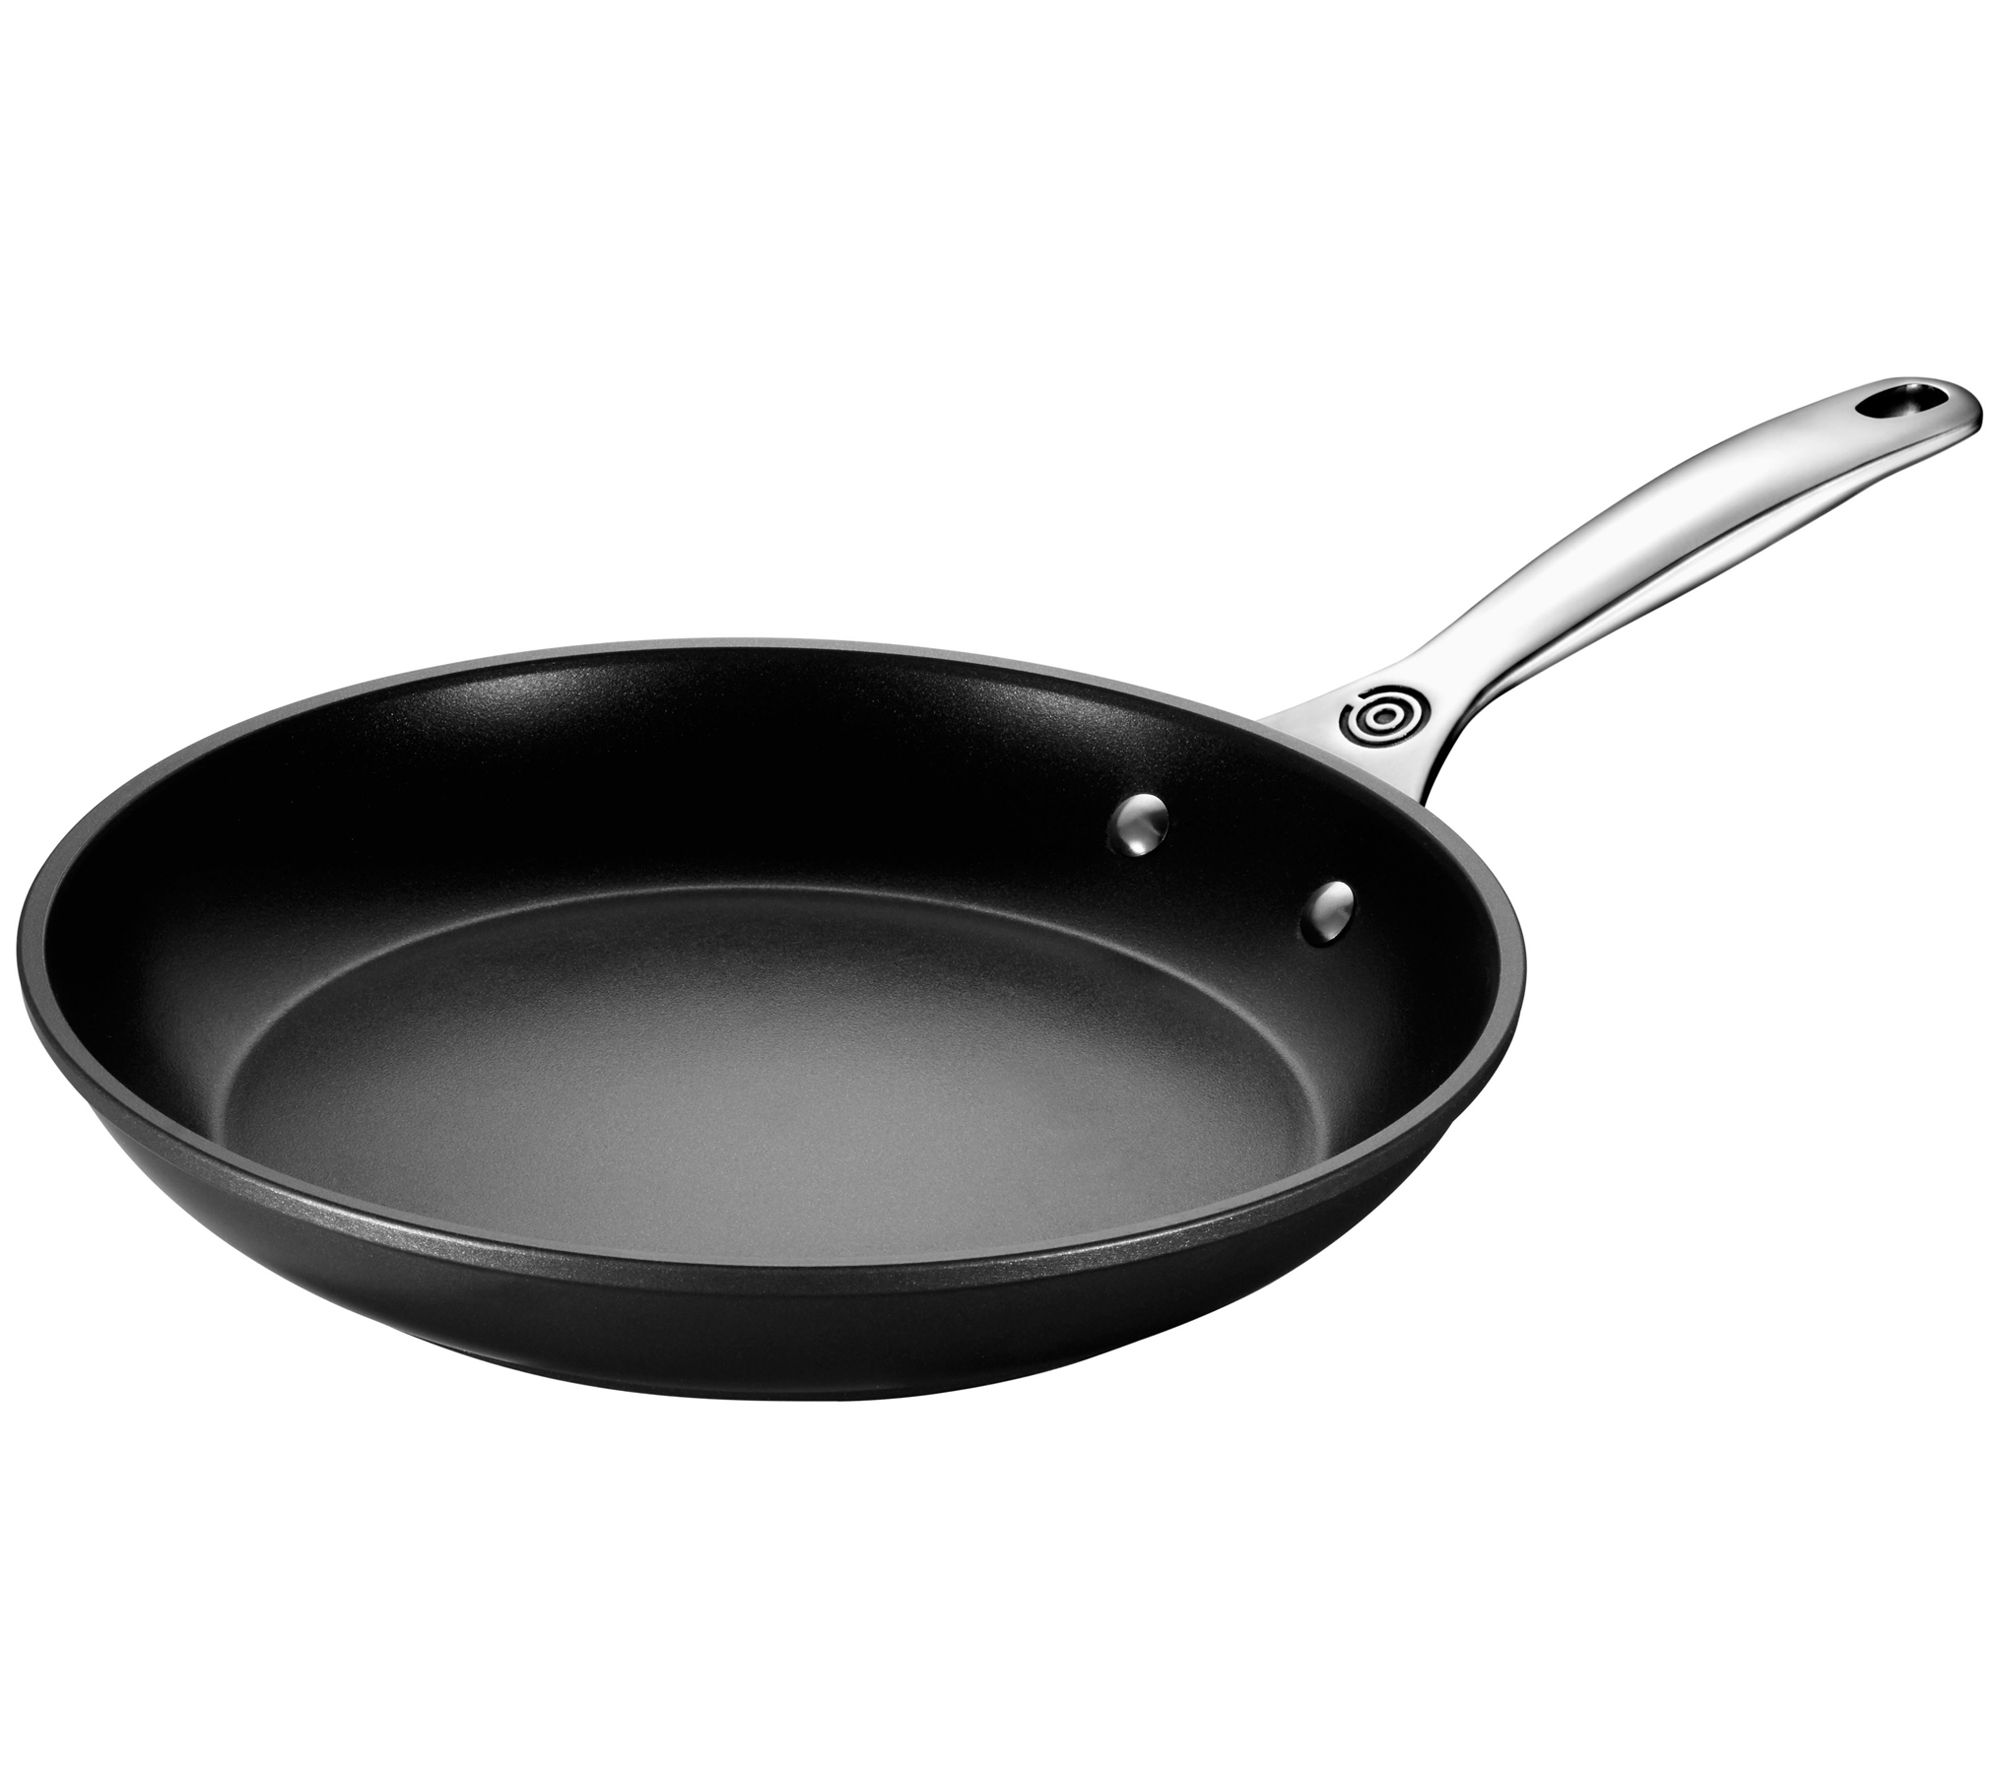 Le Creuset Toughened Non-Stick Pro 8 and 10 Fry Pan, Set of 2 + Reviews